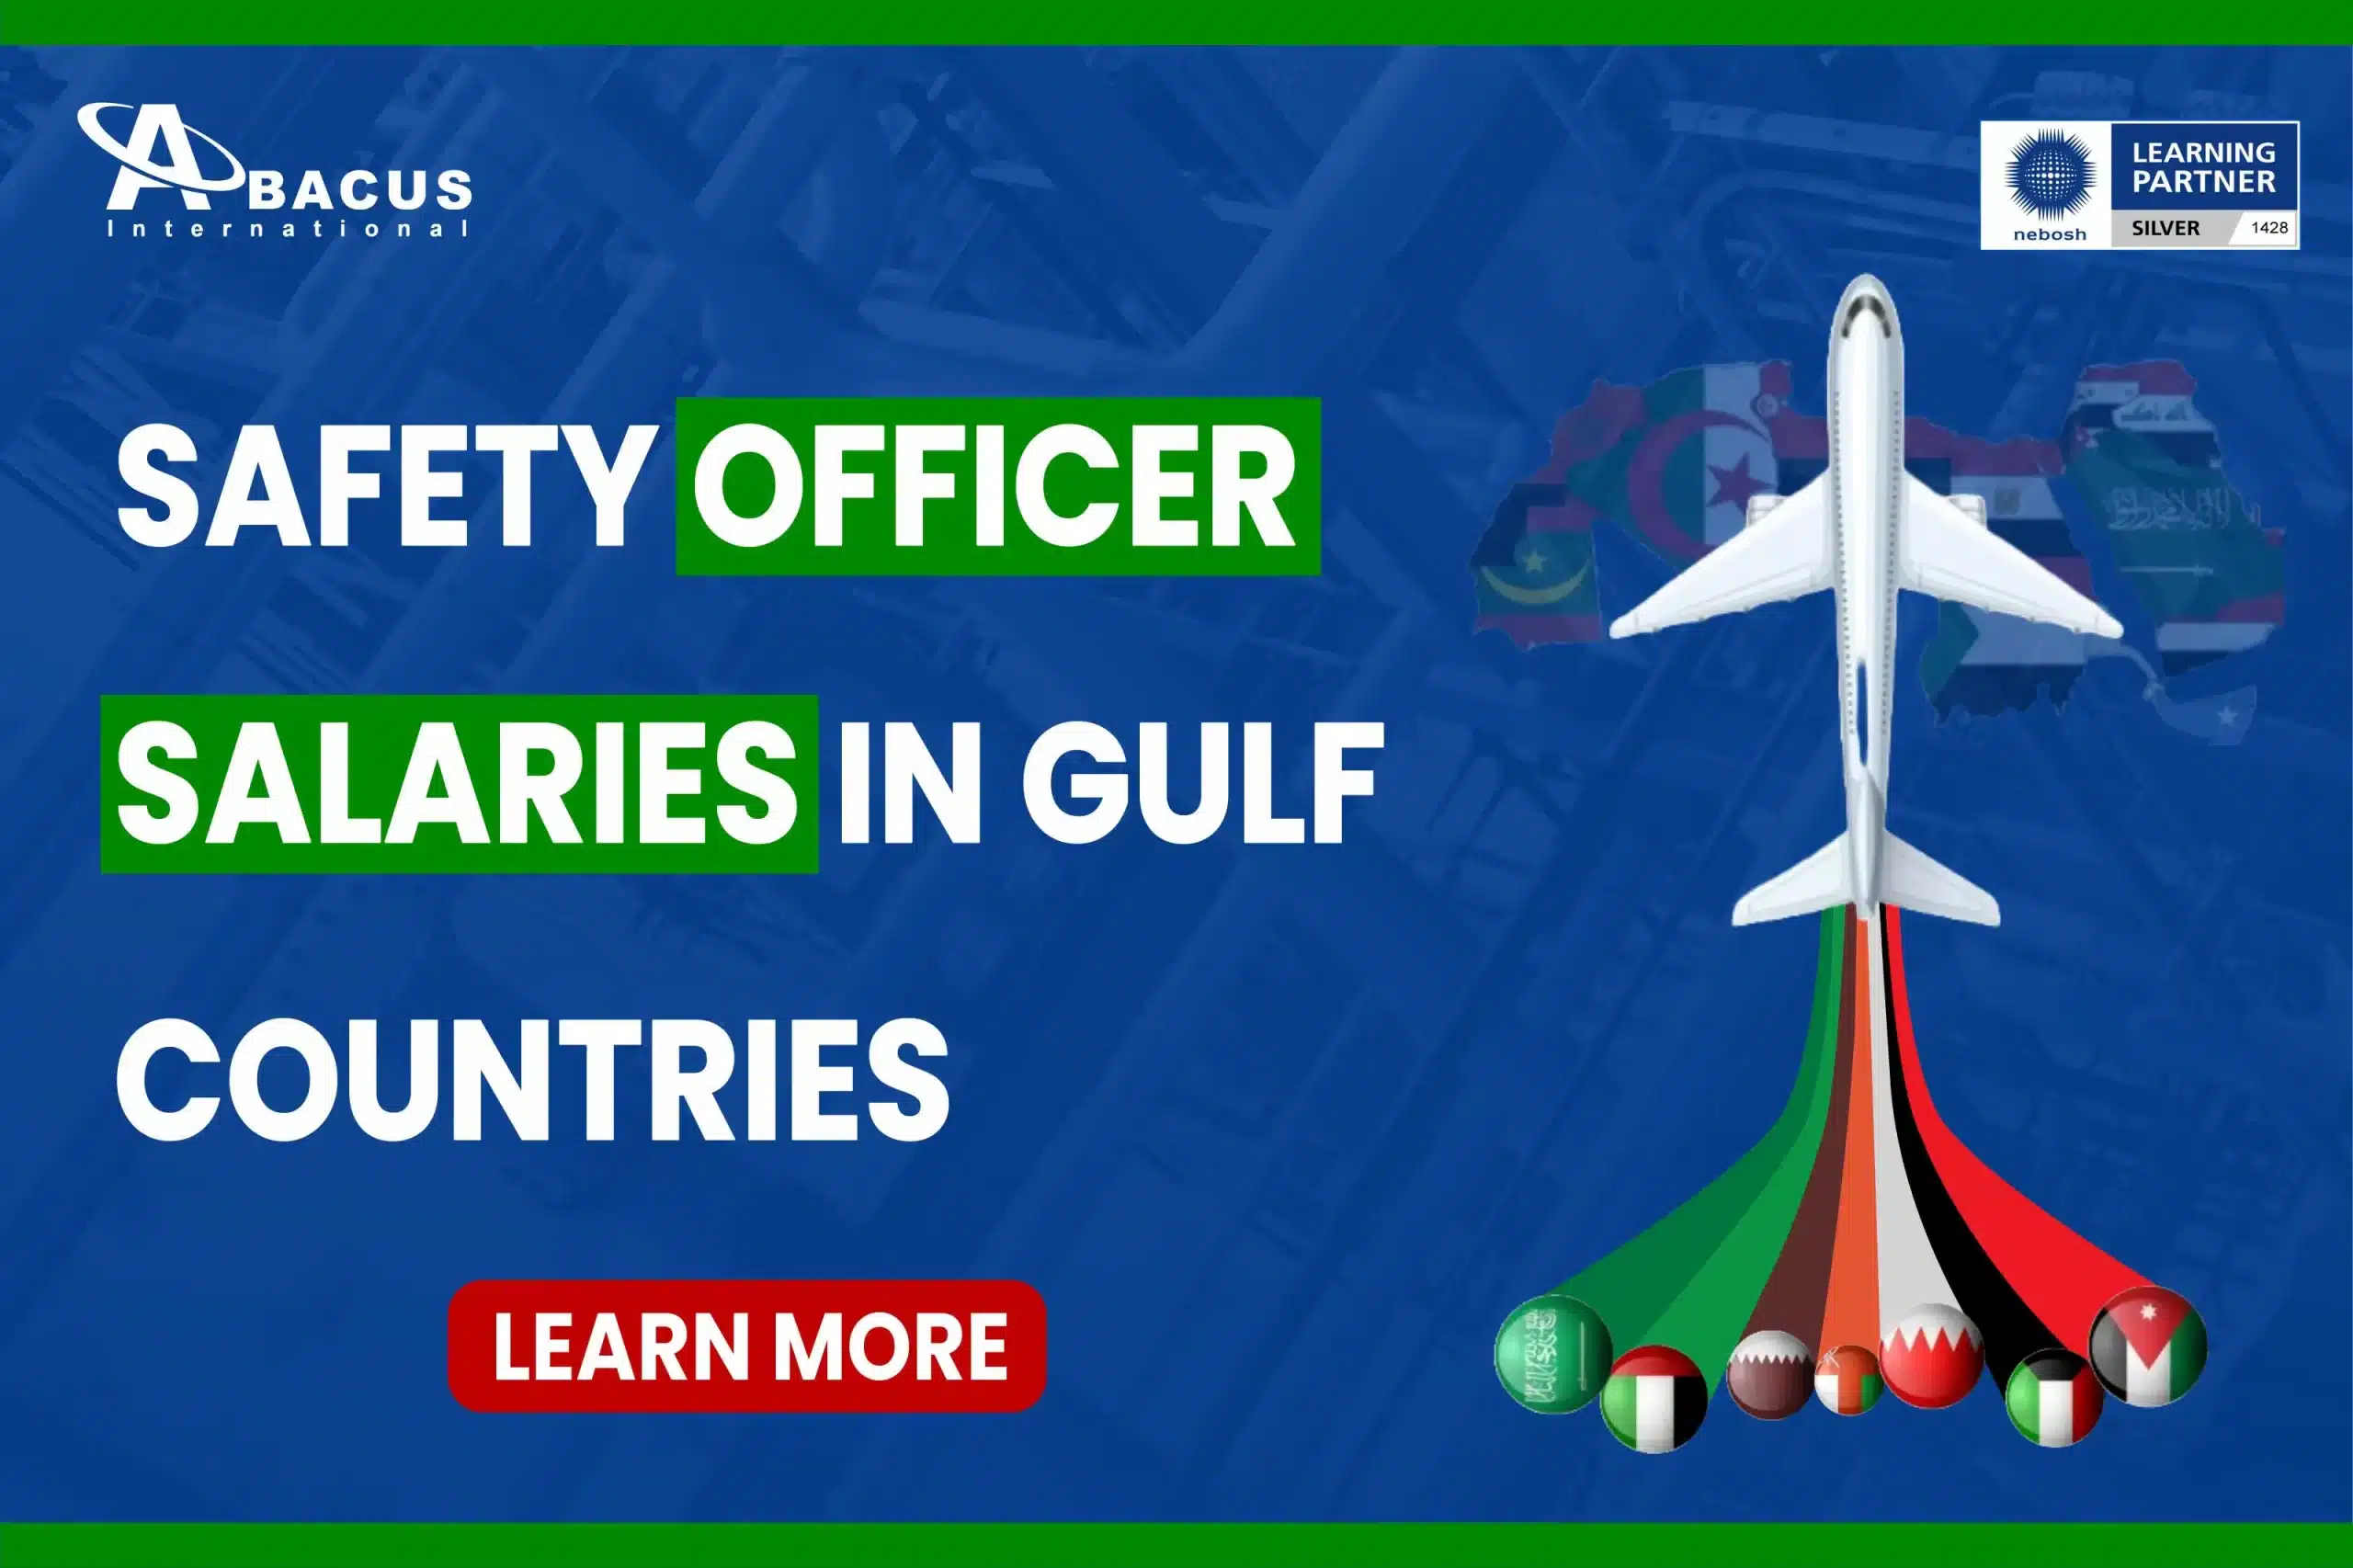 Safety officer salaries in gulf countries